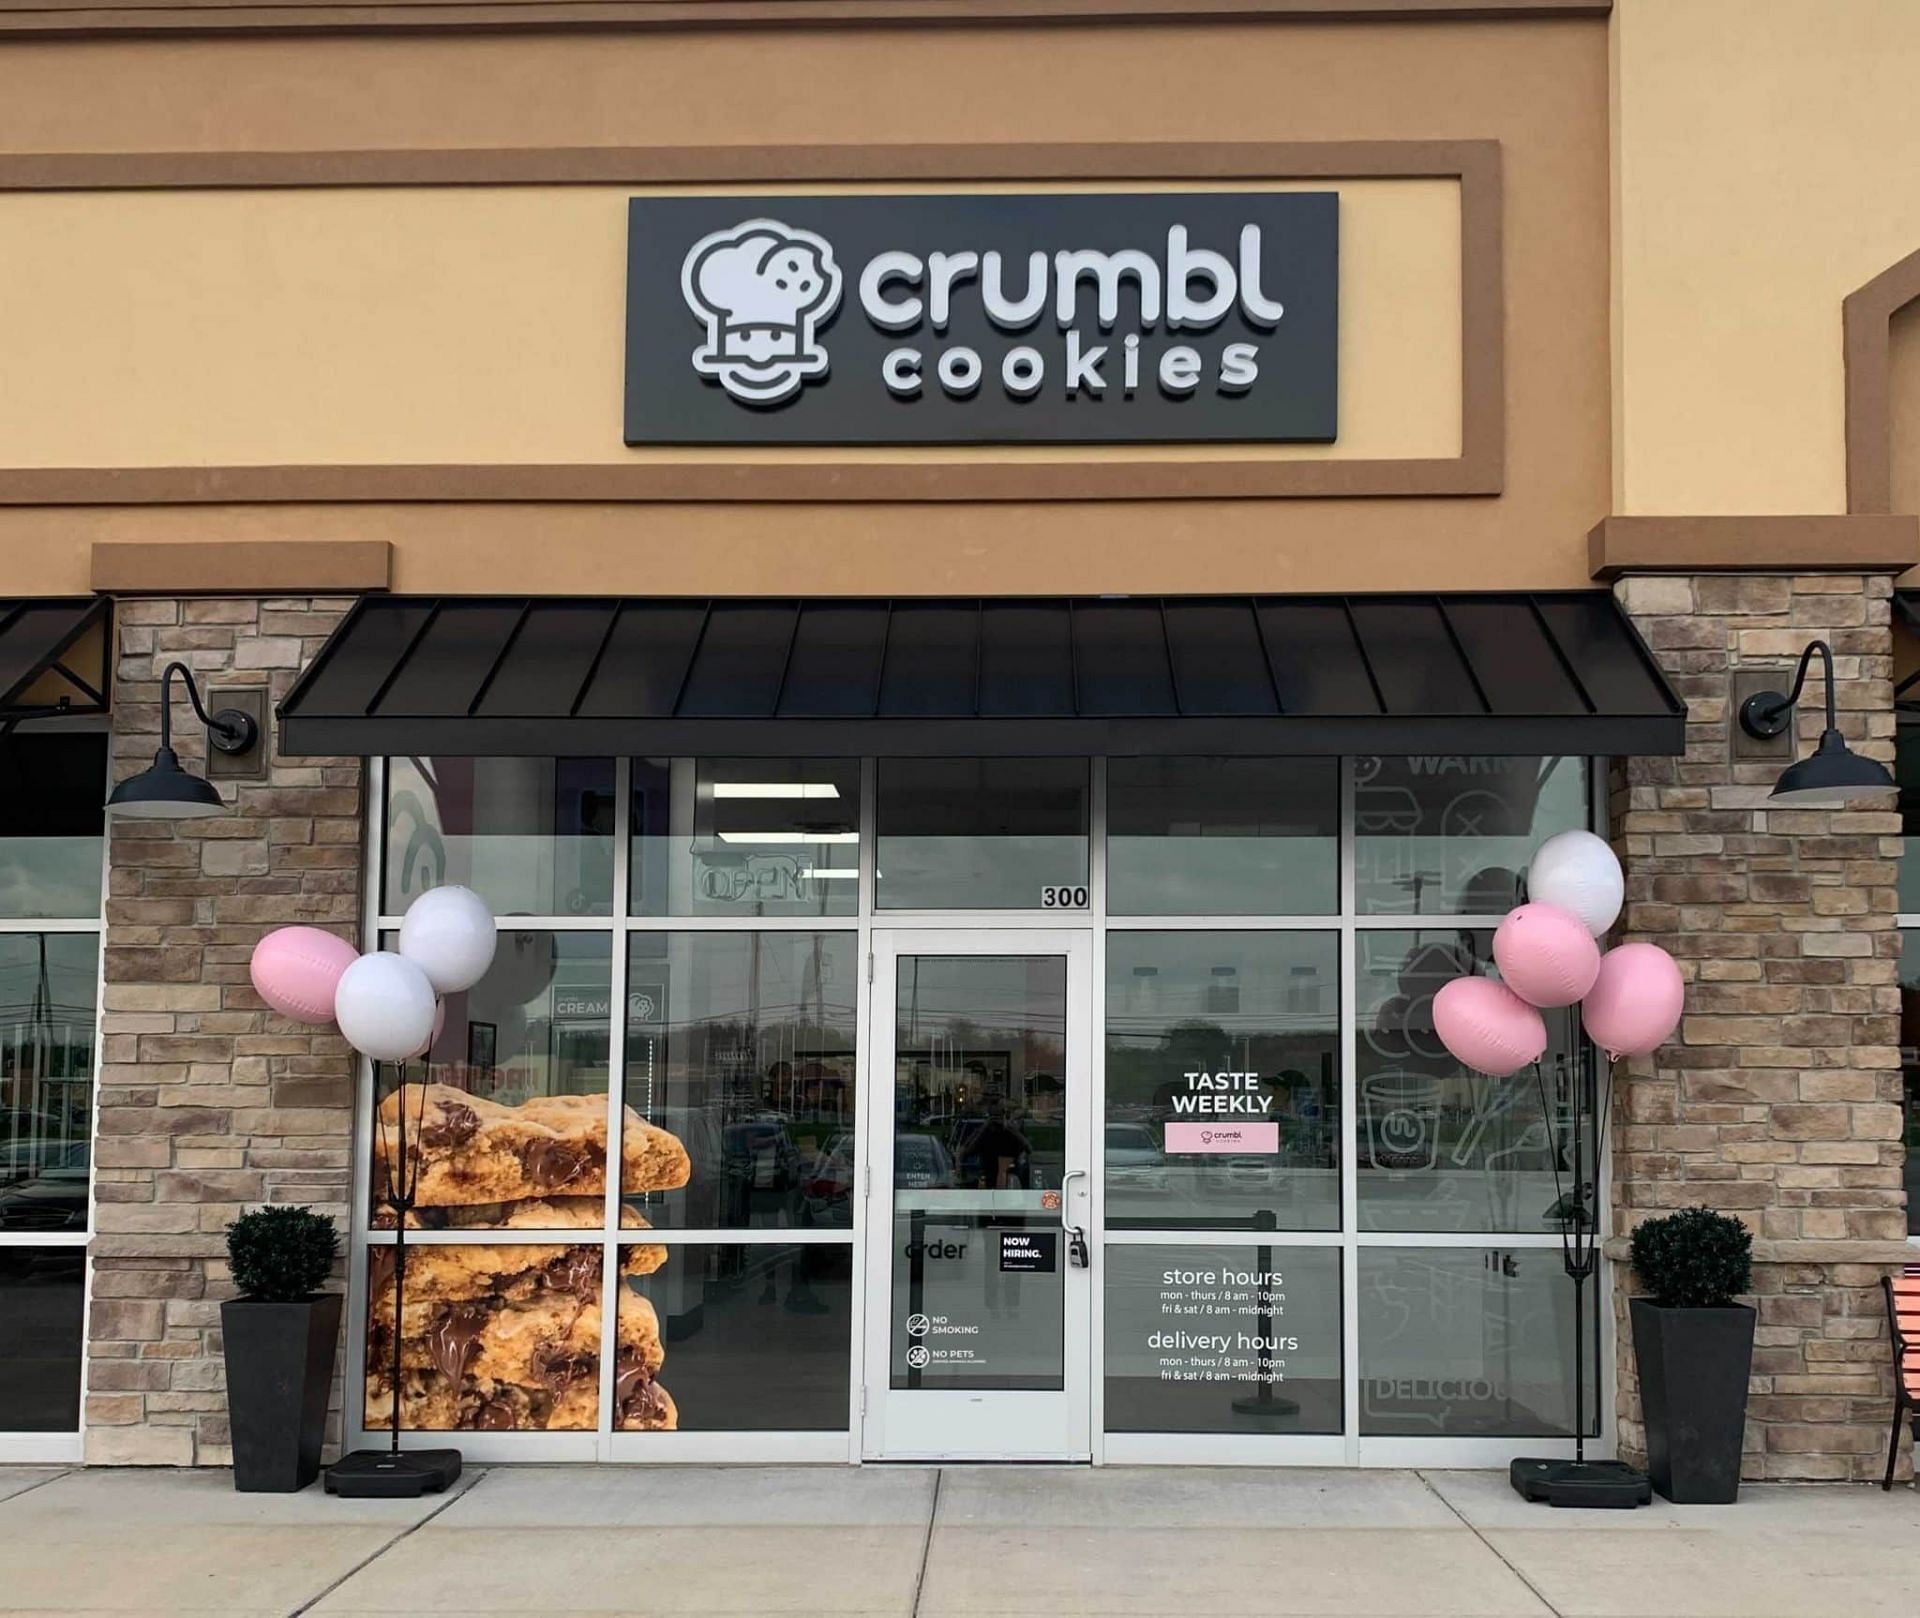 Why is Crumbl Cookies in trouble? Details about the violation of child labor act explored. (Image via Crumbl Cookies)